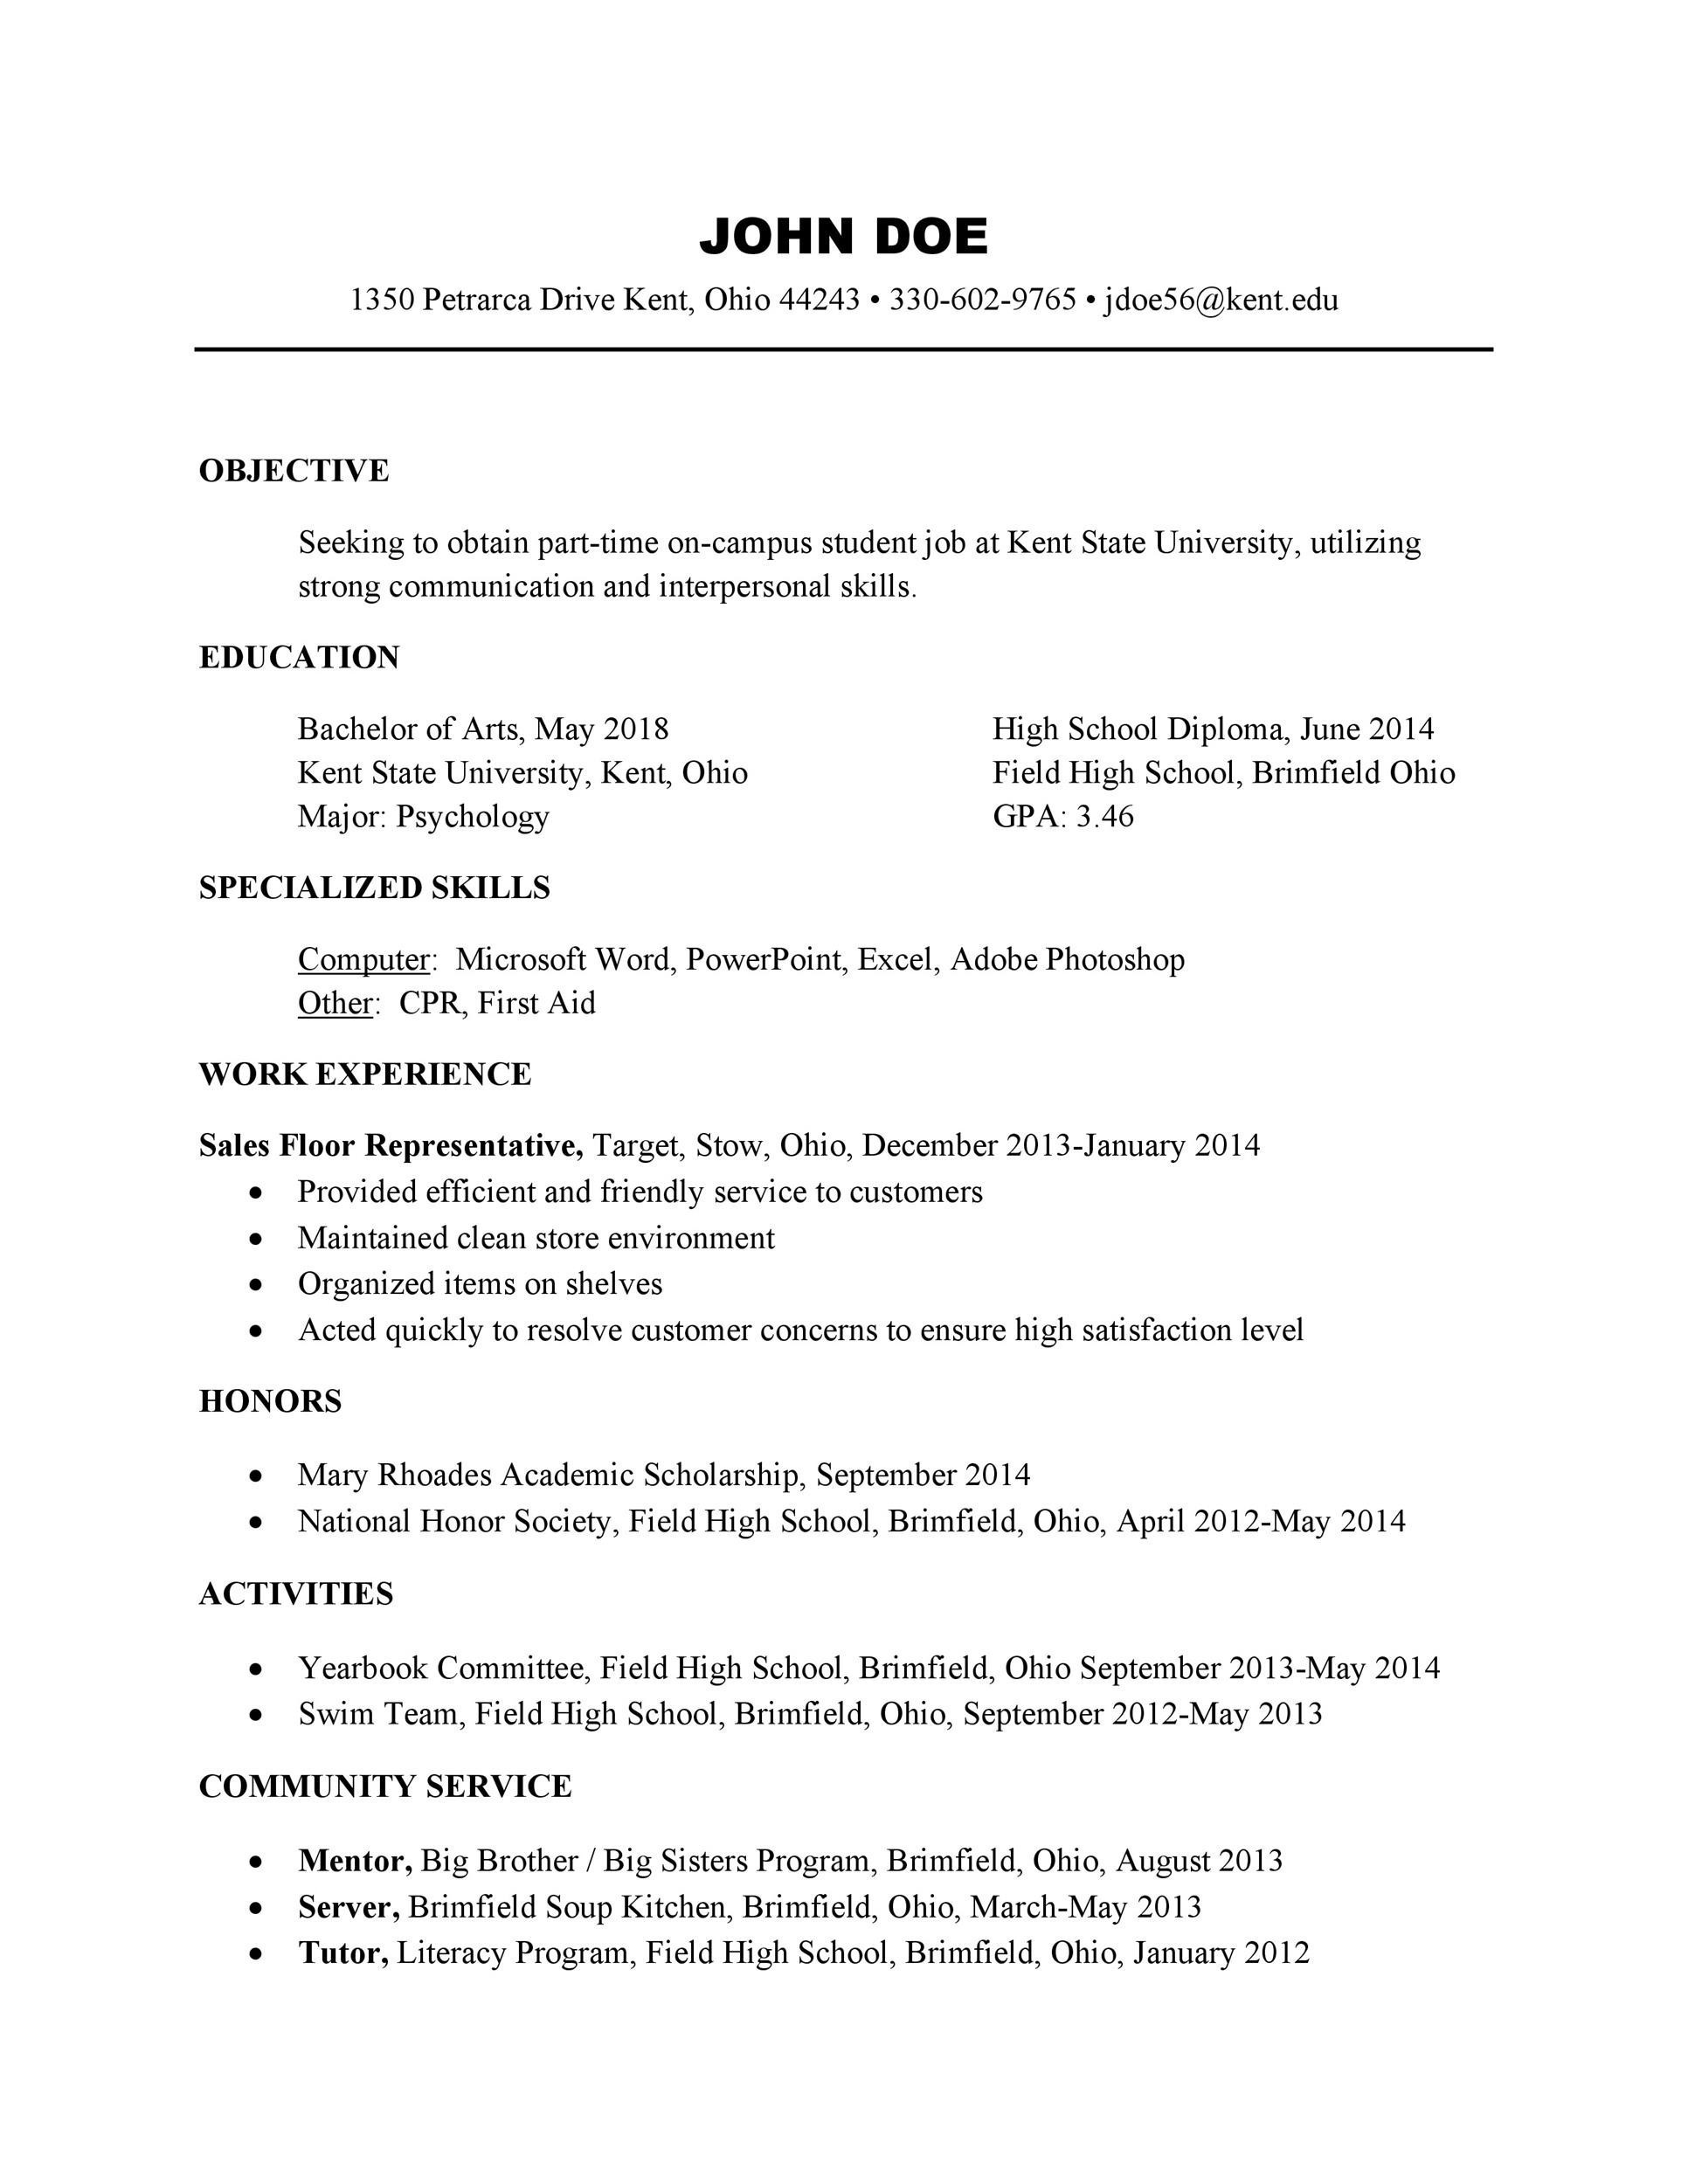 Resume Template Examples for College Students 50 College Student Resume Templates (& format) á Templatelab